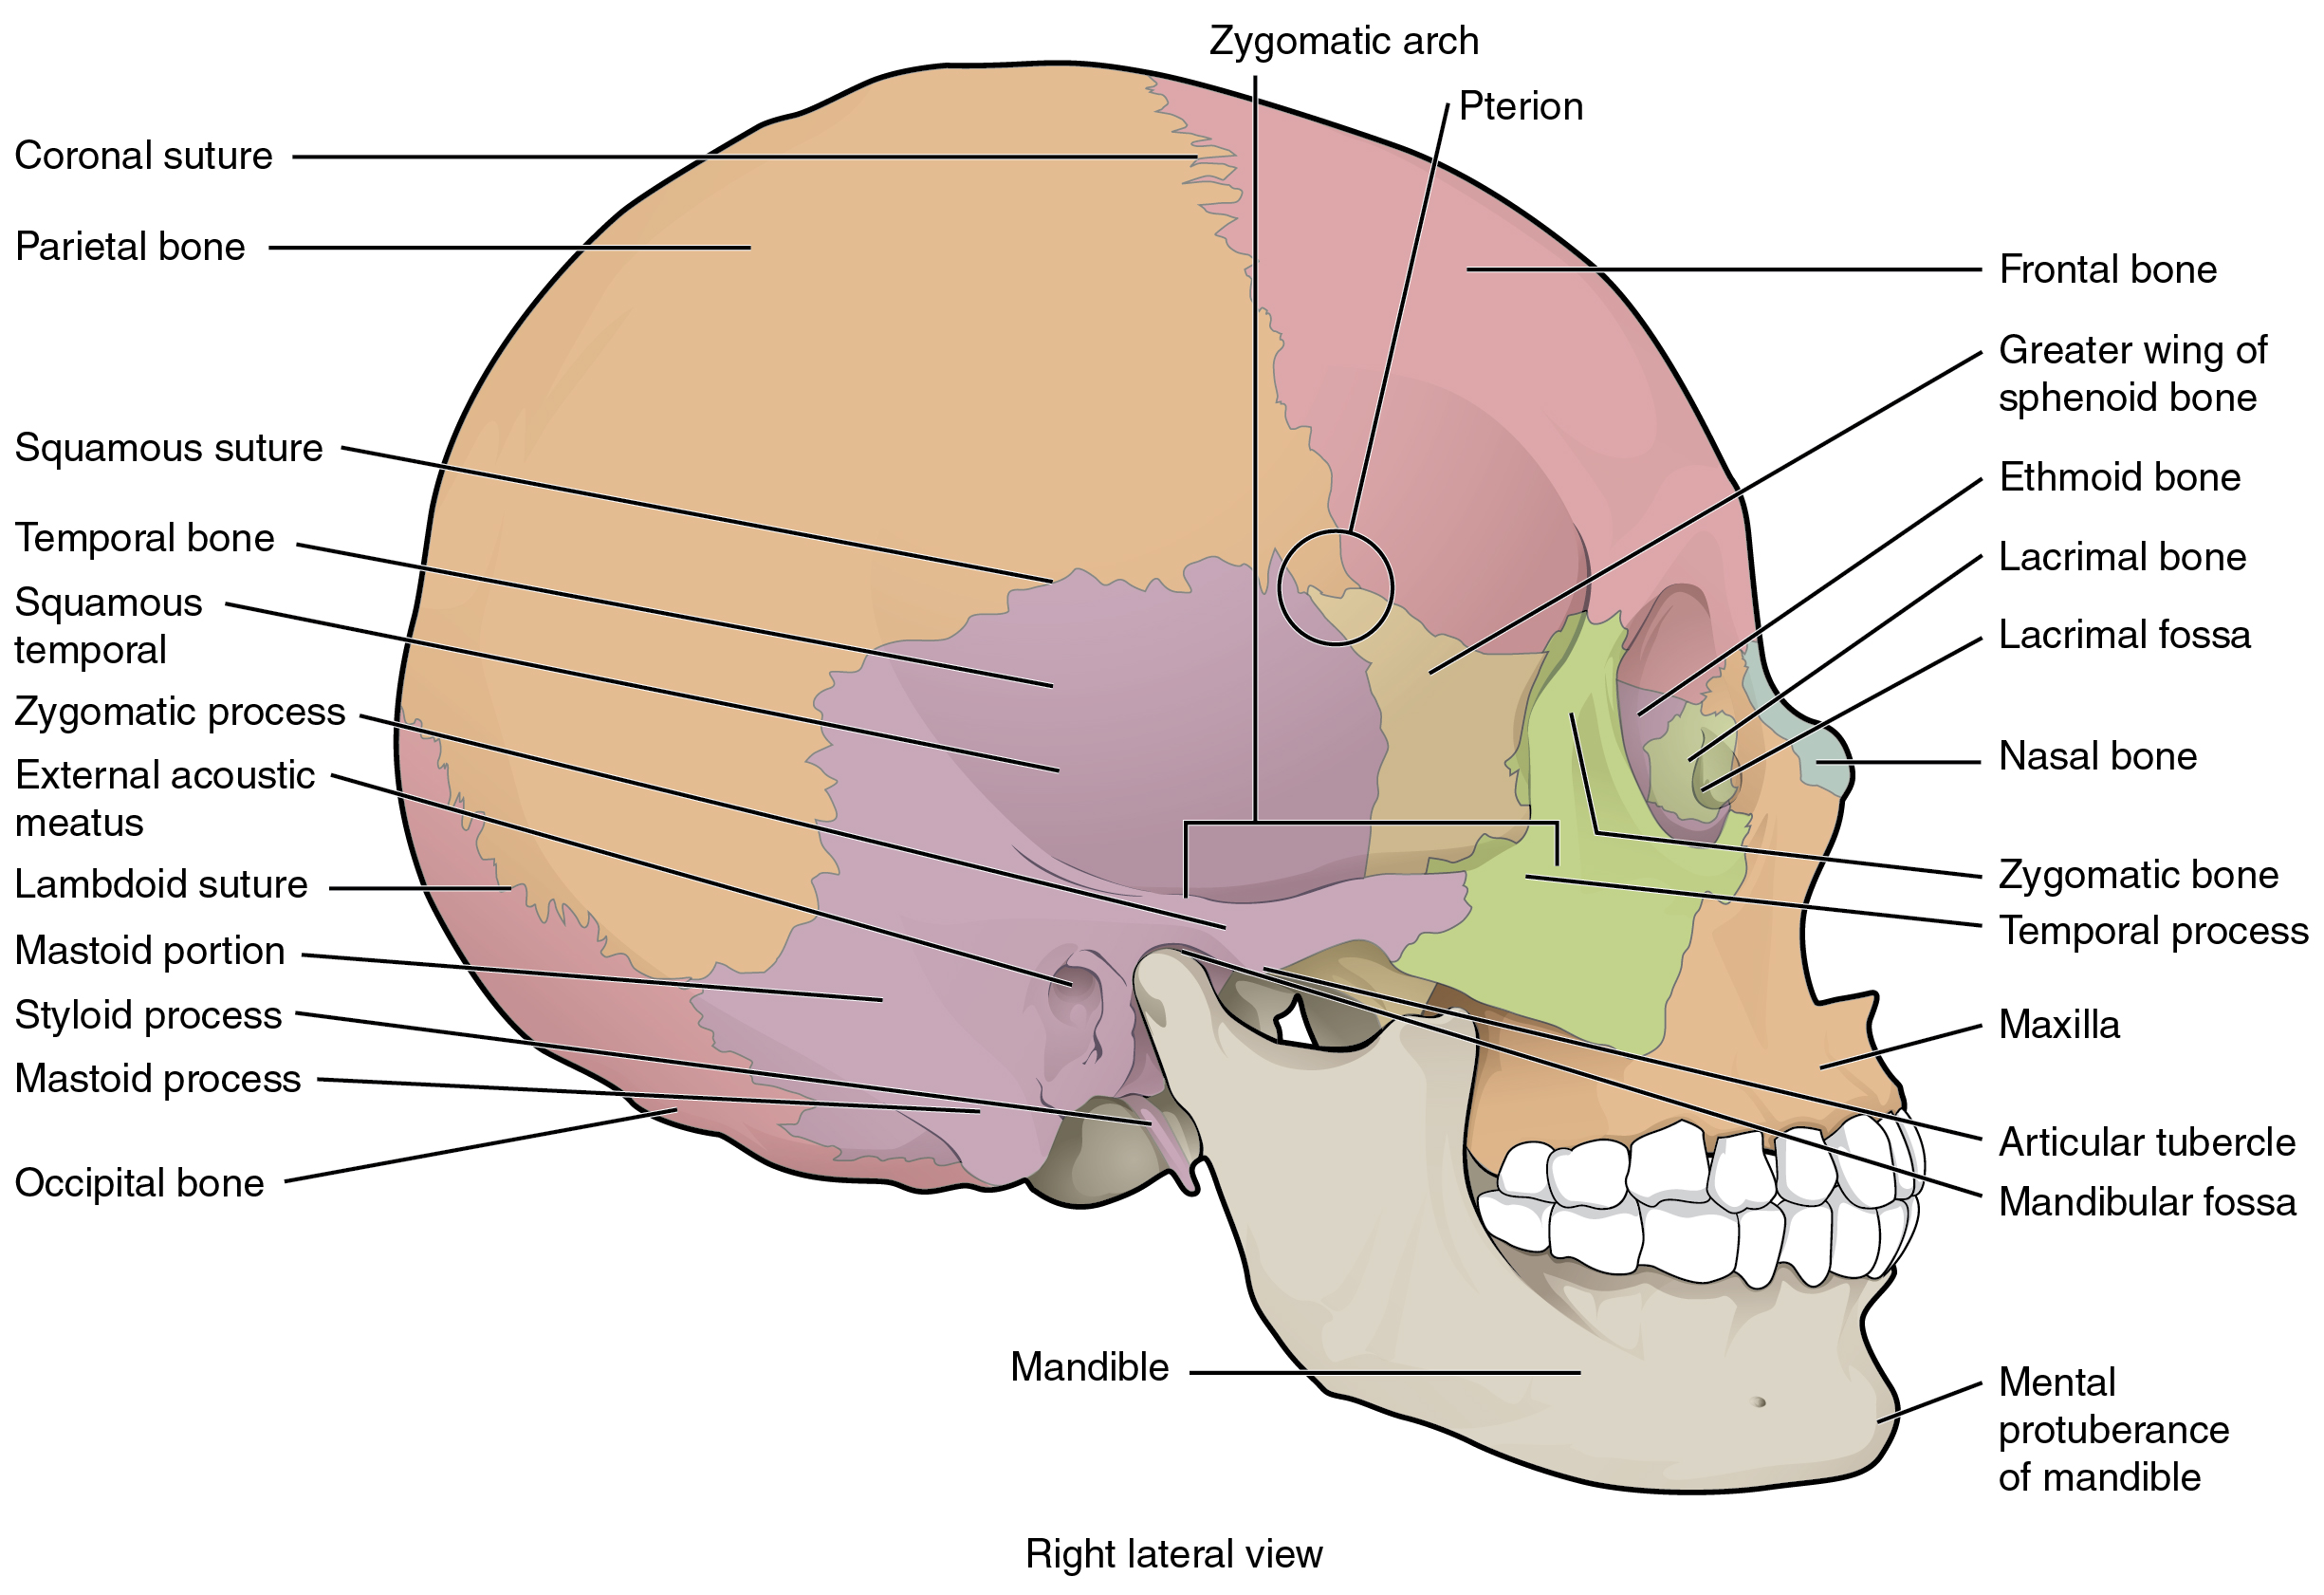 This image shows the lateral view of the human skull and identifies the major parts.